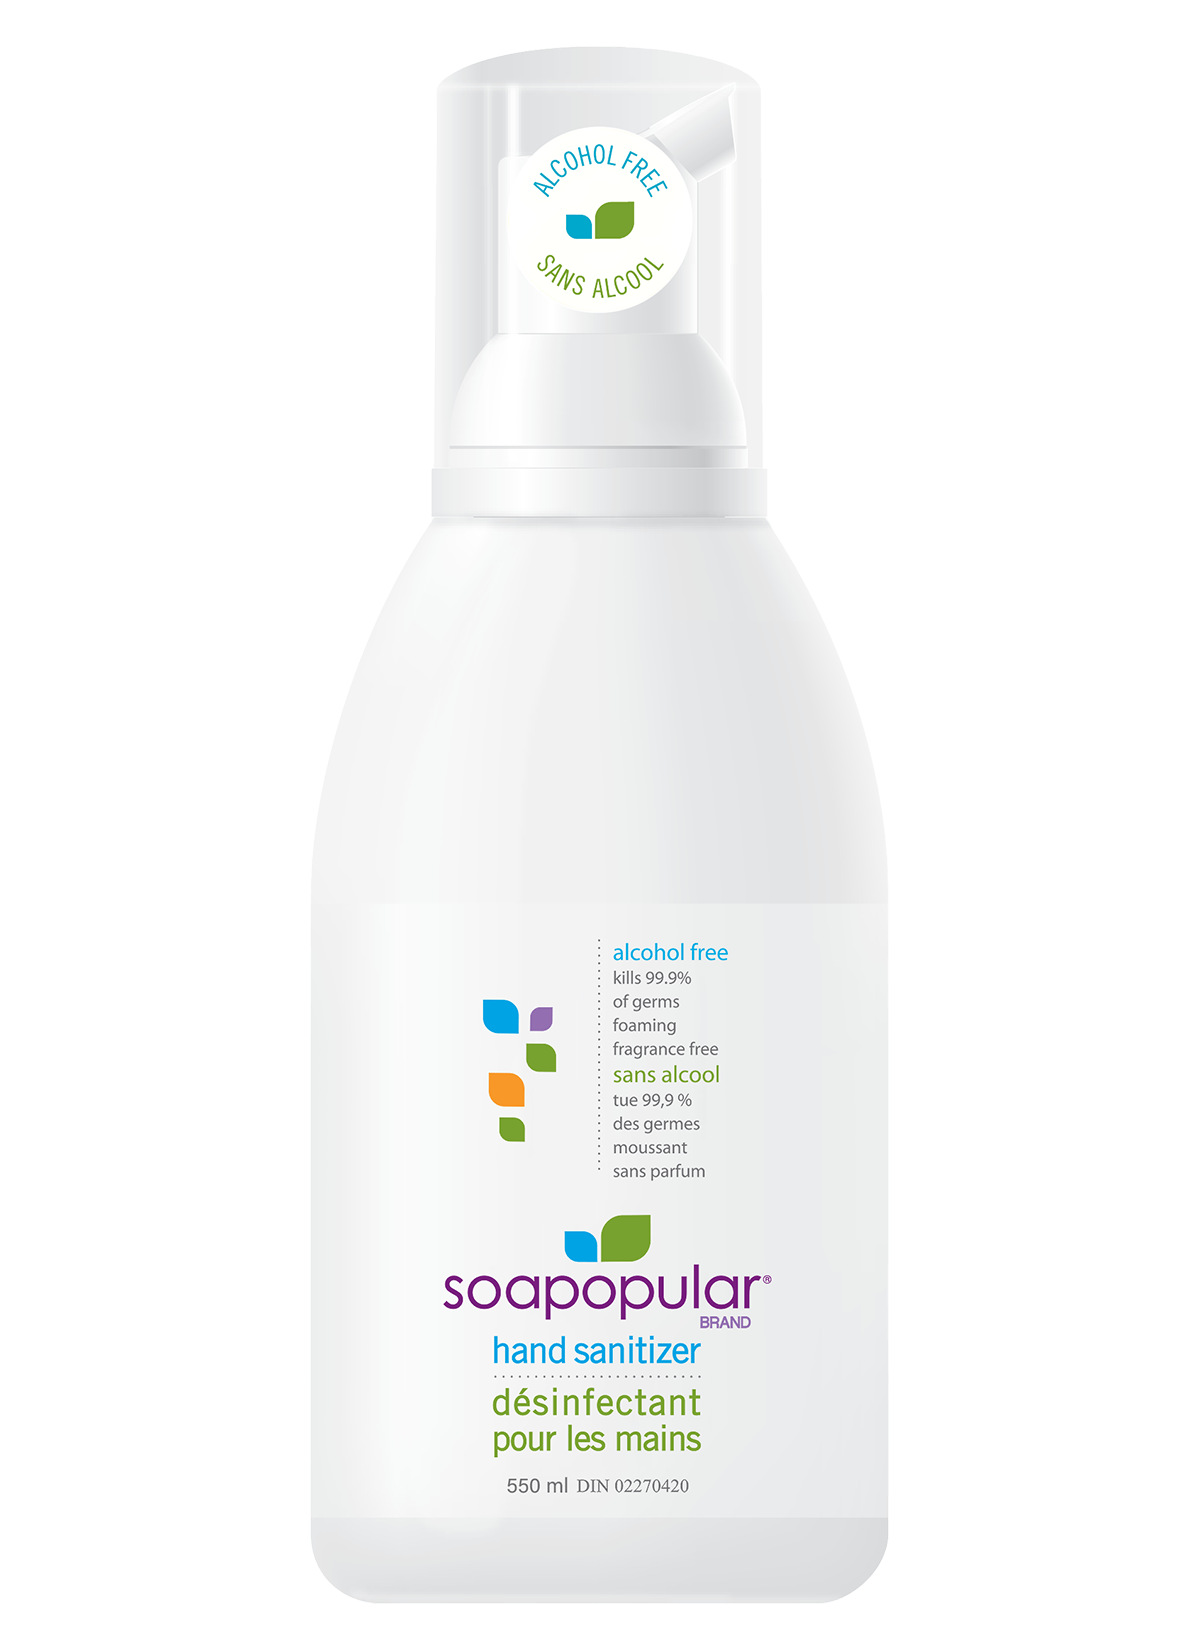 Soapopular alcohol free sanitizer comes in a 550mL bottle and applies a foaming formula.